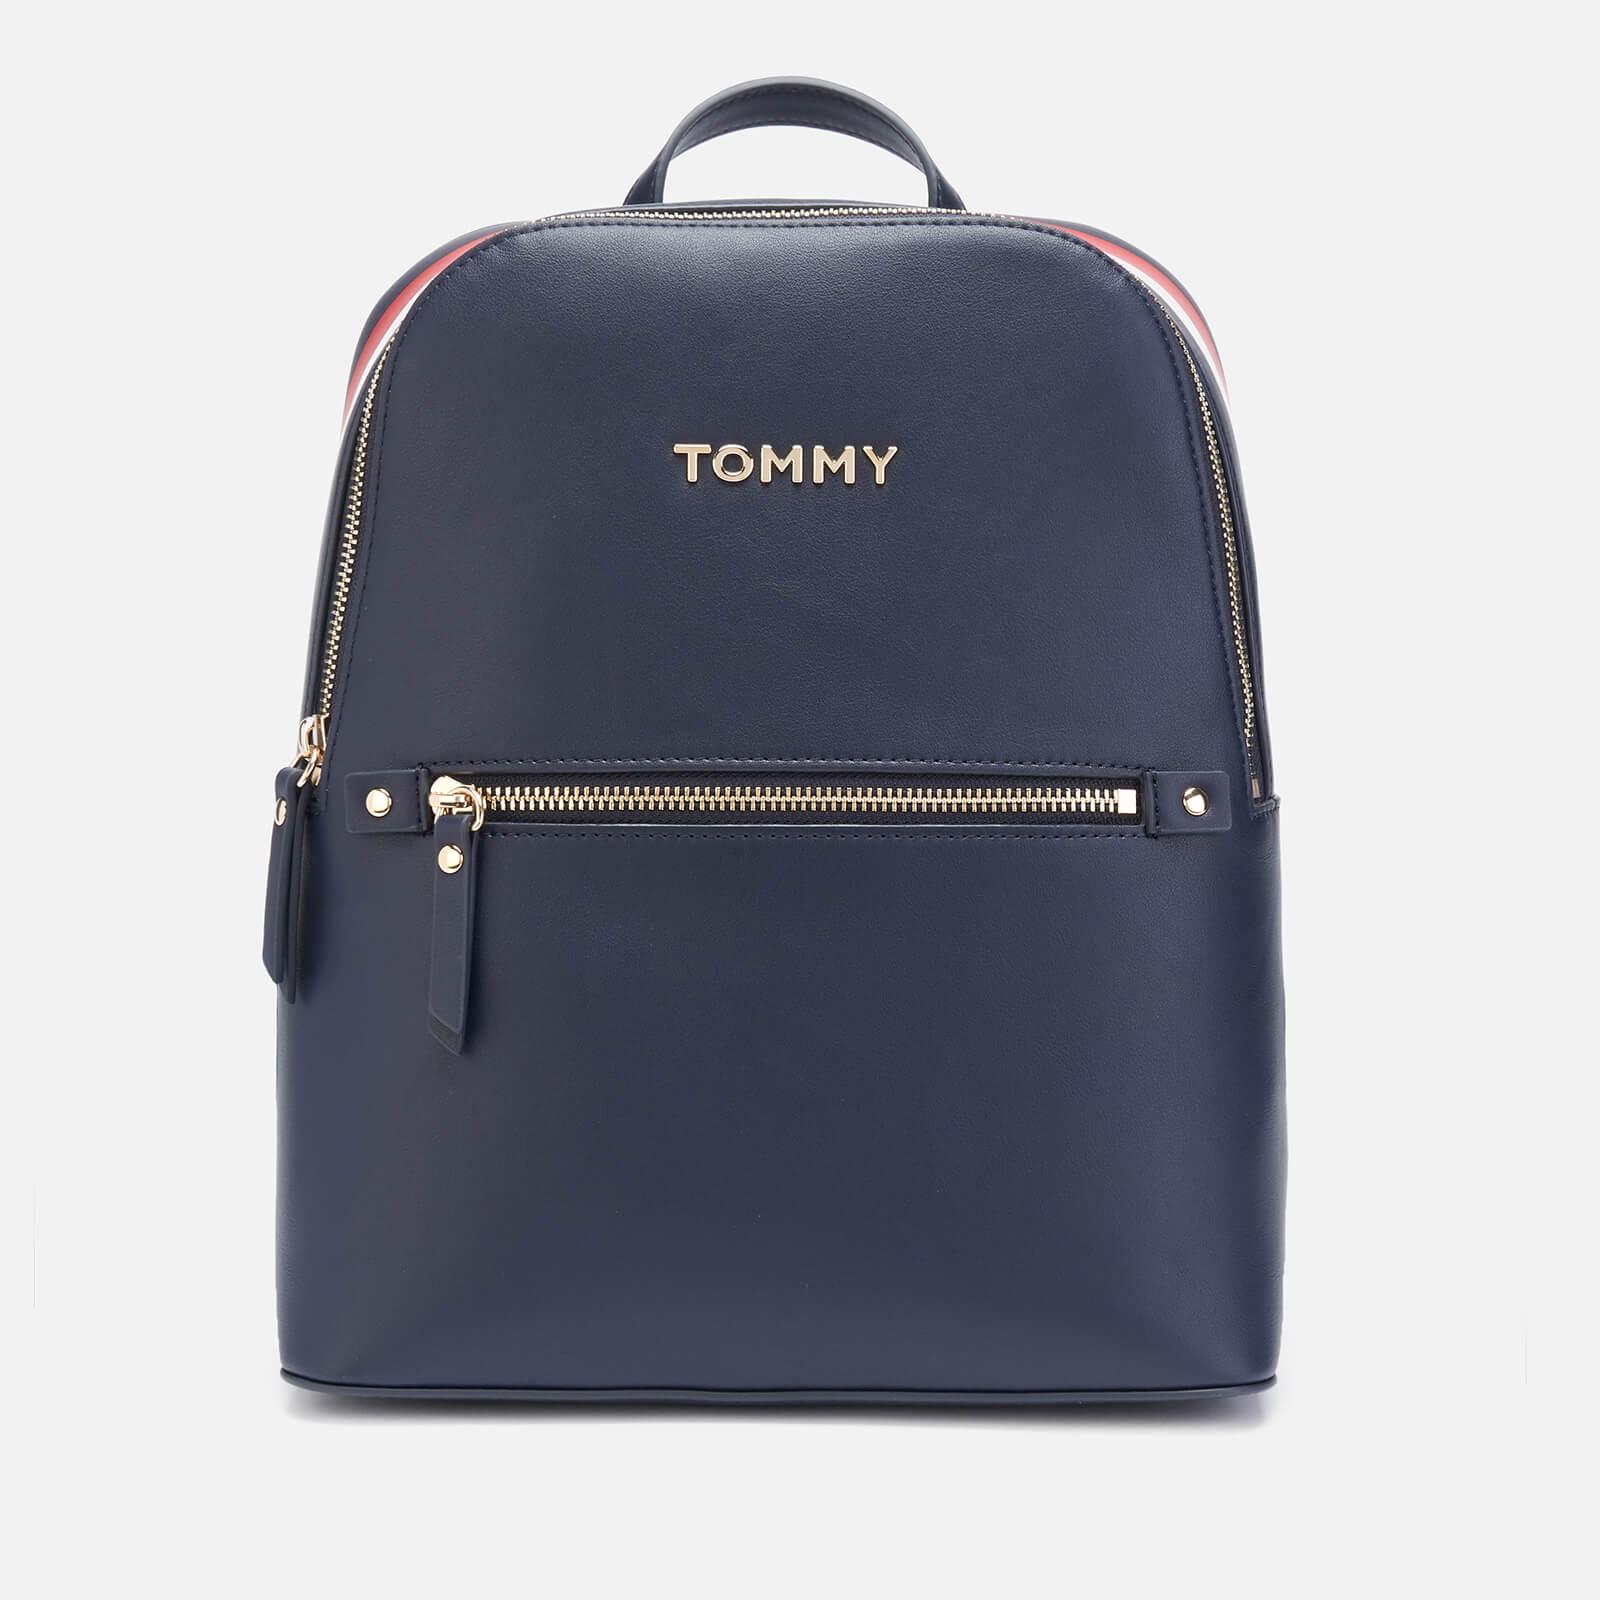 tommy backpack women's